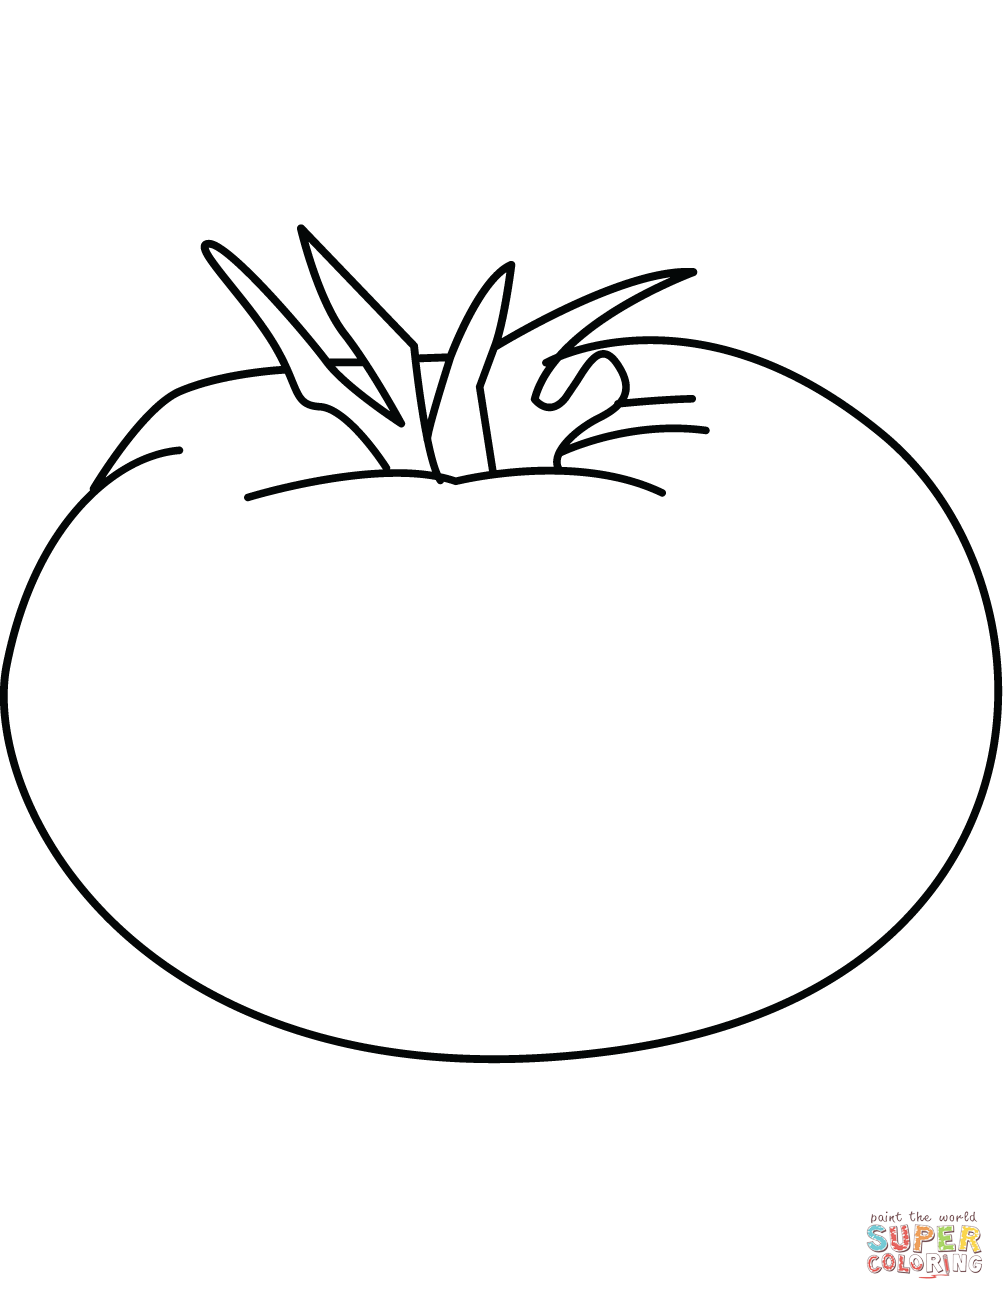 Tomato coloring page | Free Printable Coloring Pages